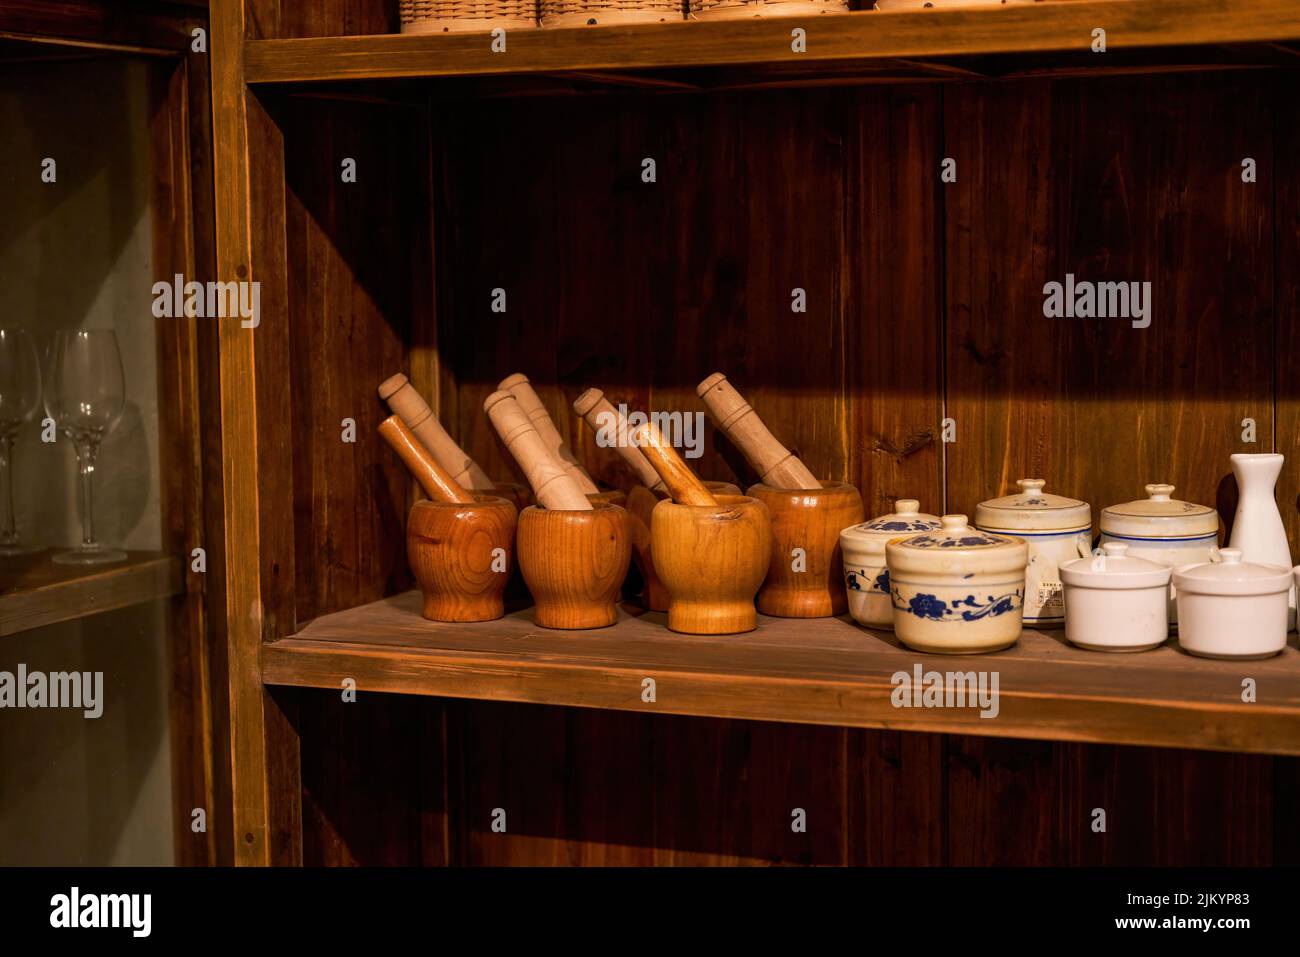 Sideboard and utensils in traditional Chinese restaurant Stock Photo